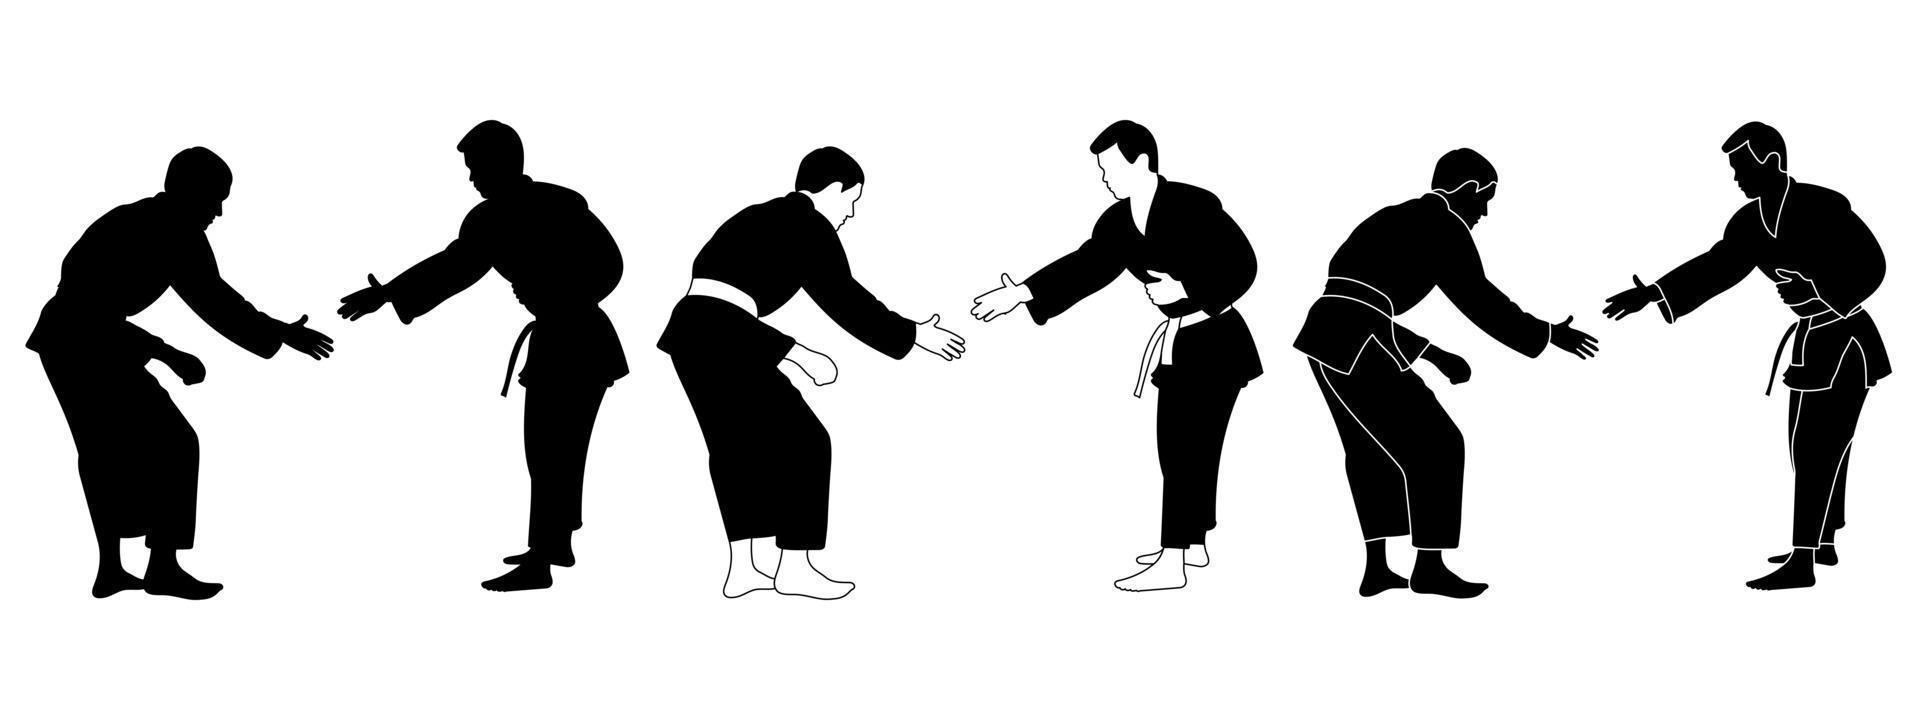 Silhouettes judoist, judoka, fighter in a duel, fight, judo sport, martial art, sport silhouettes pack vector